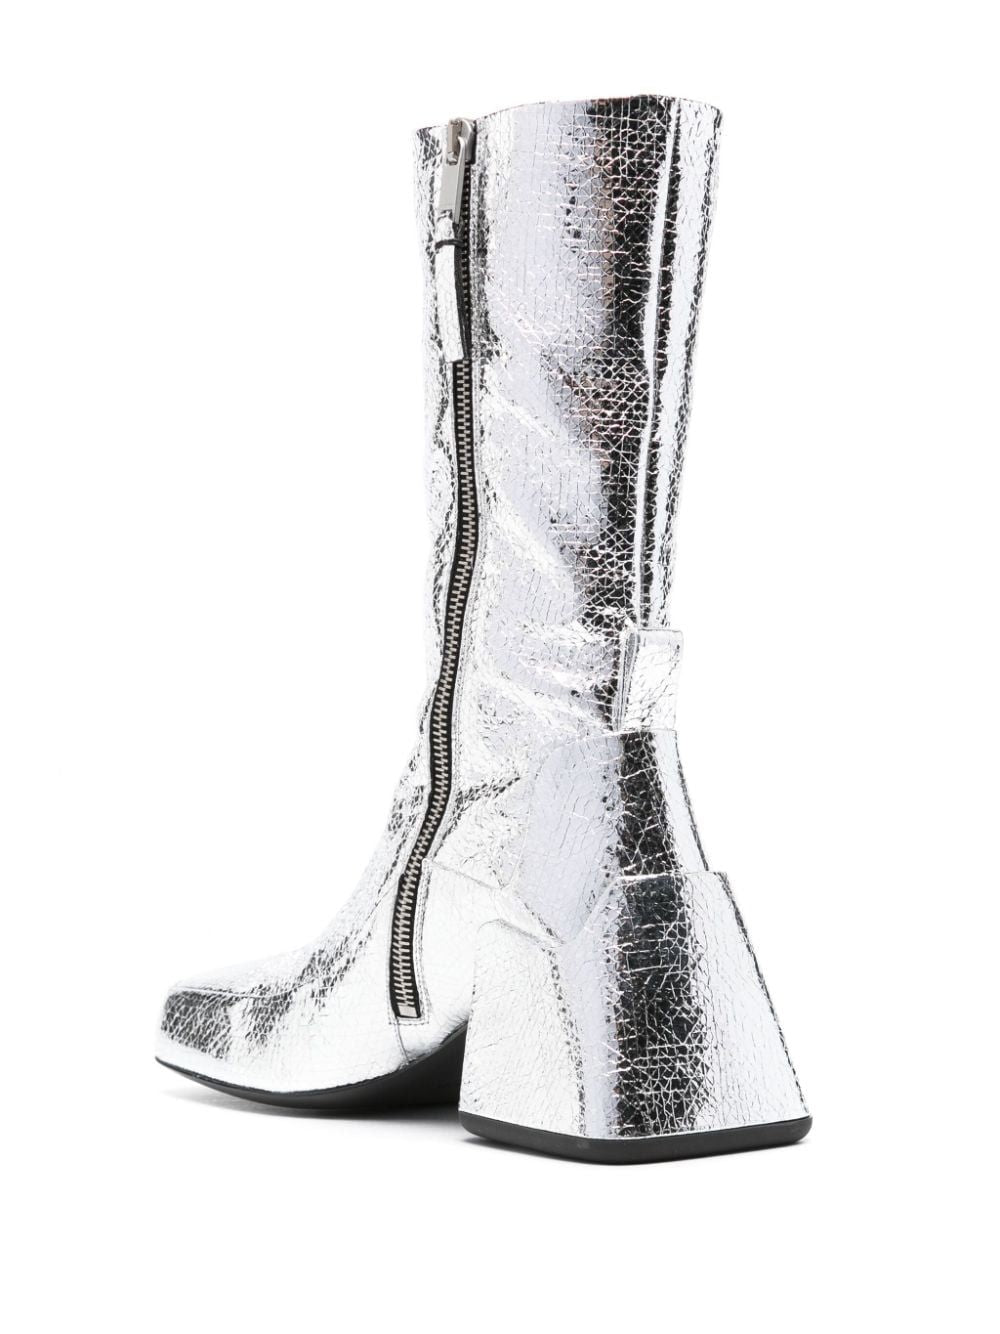 Silver Laminated Leather Boots for Women